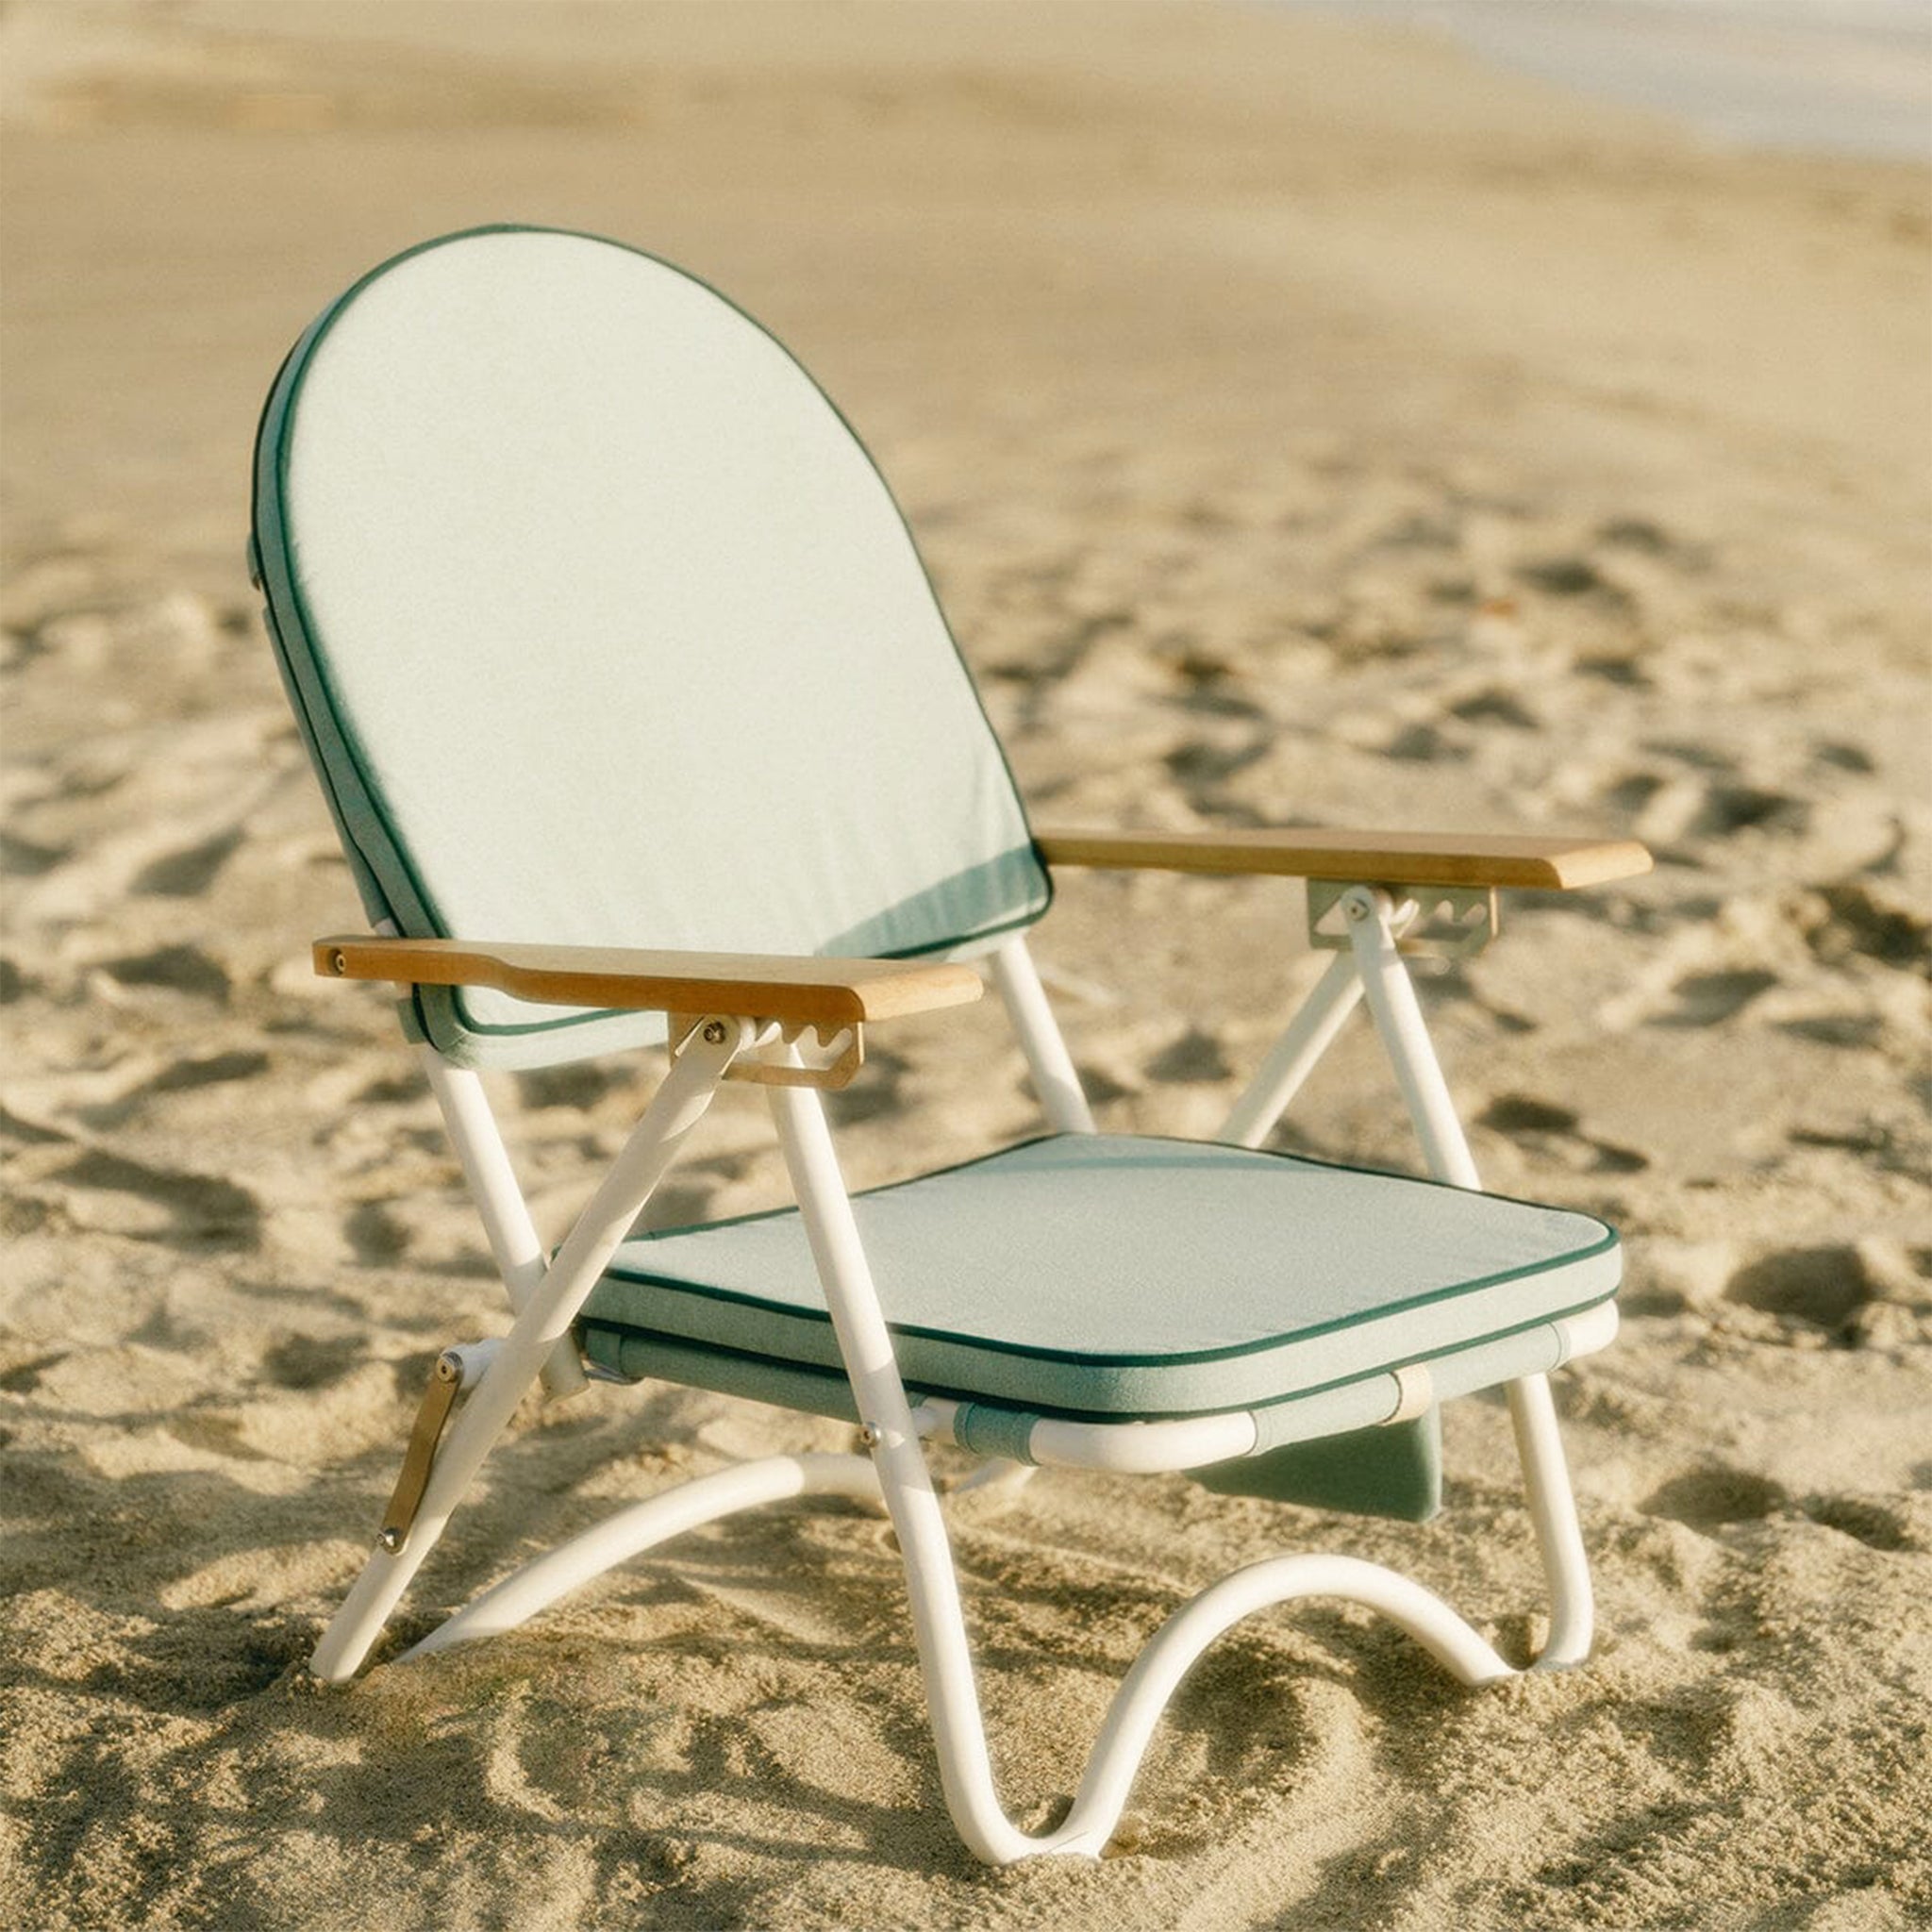 A green arched folding beach chair with wood arm rests and a zipper pocket in the back. 